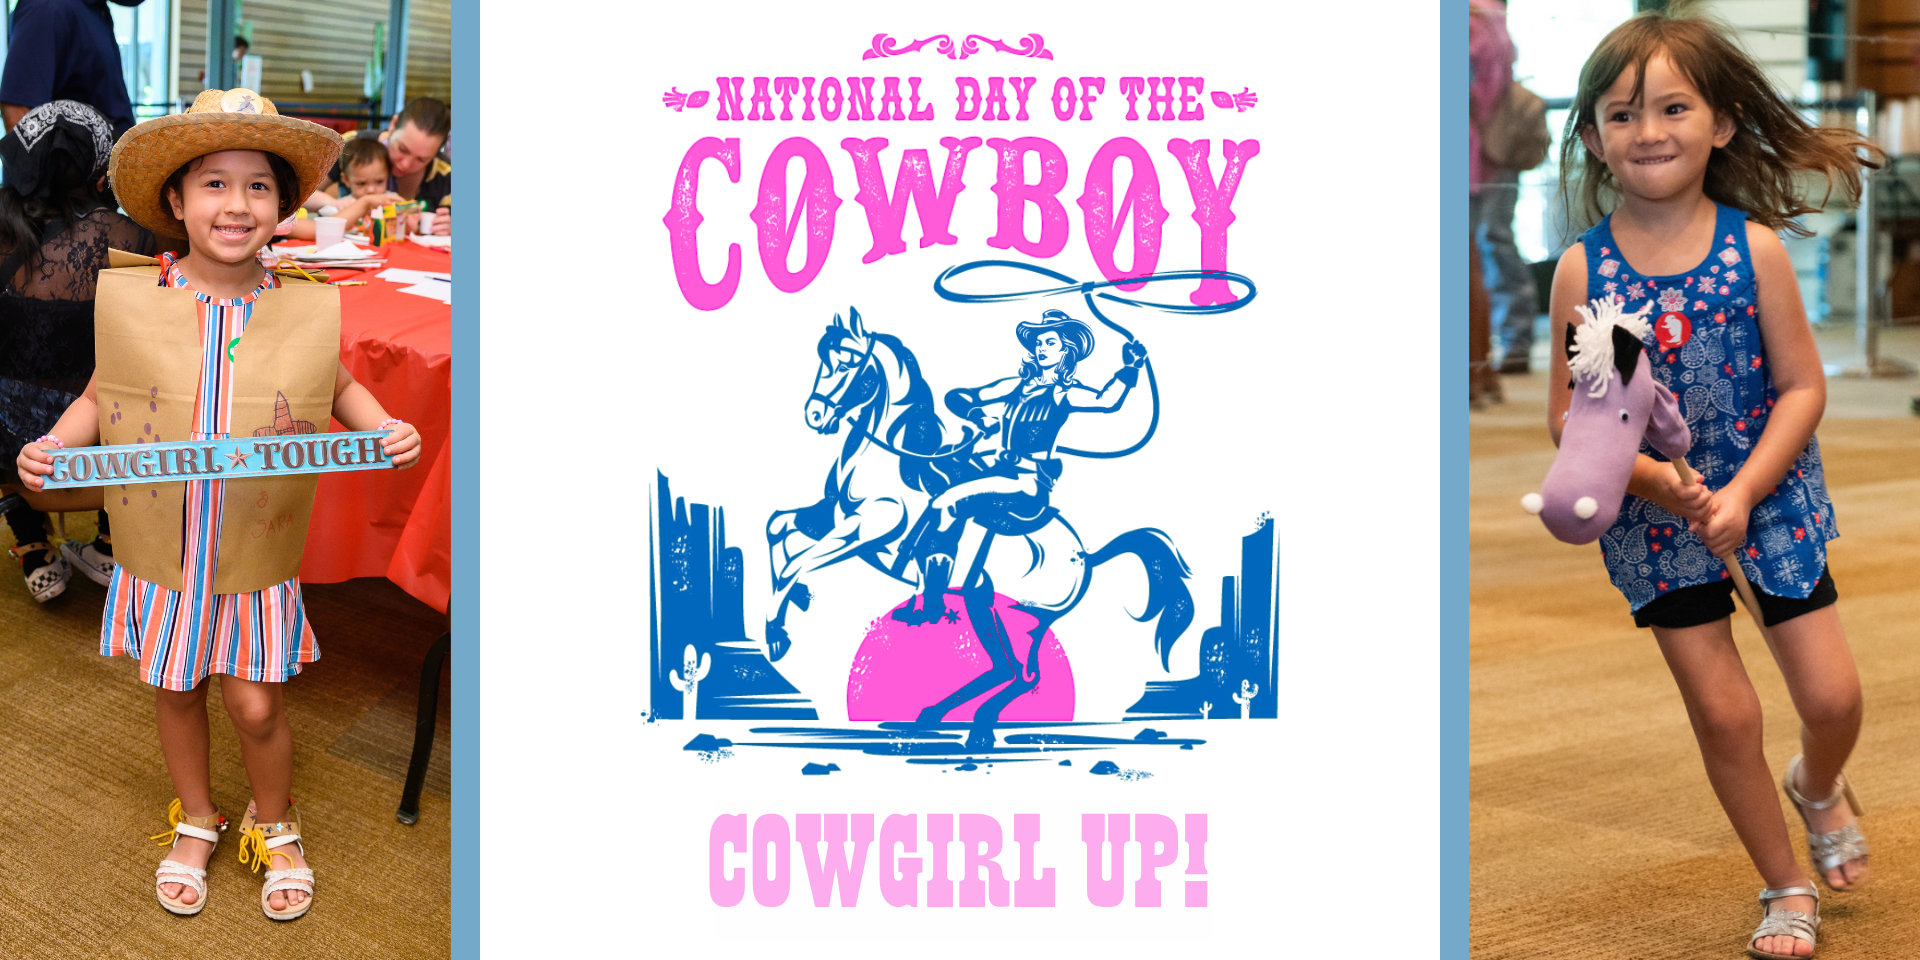 National Day of the Cowboy - Cowgirl Up Event Photo